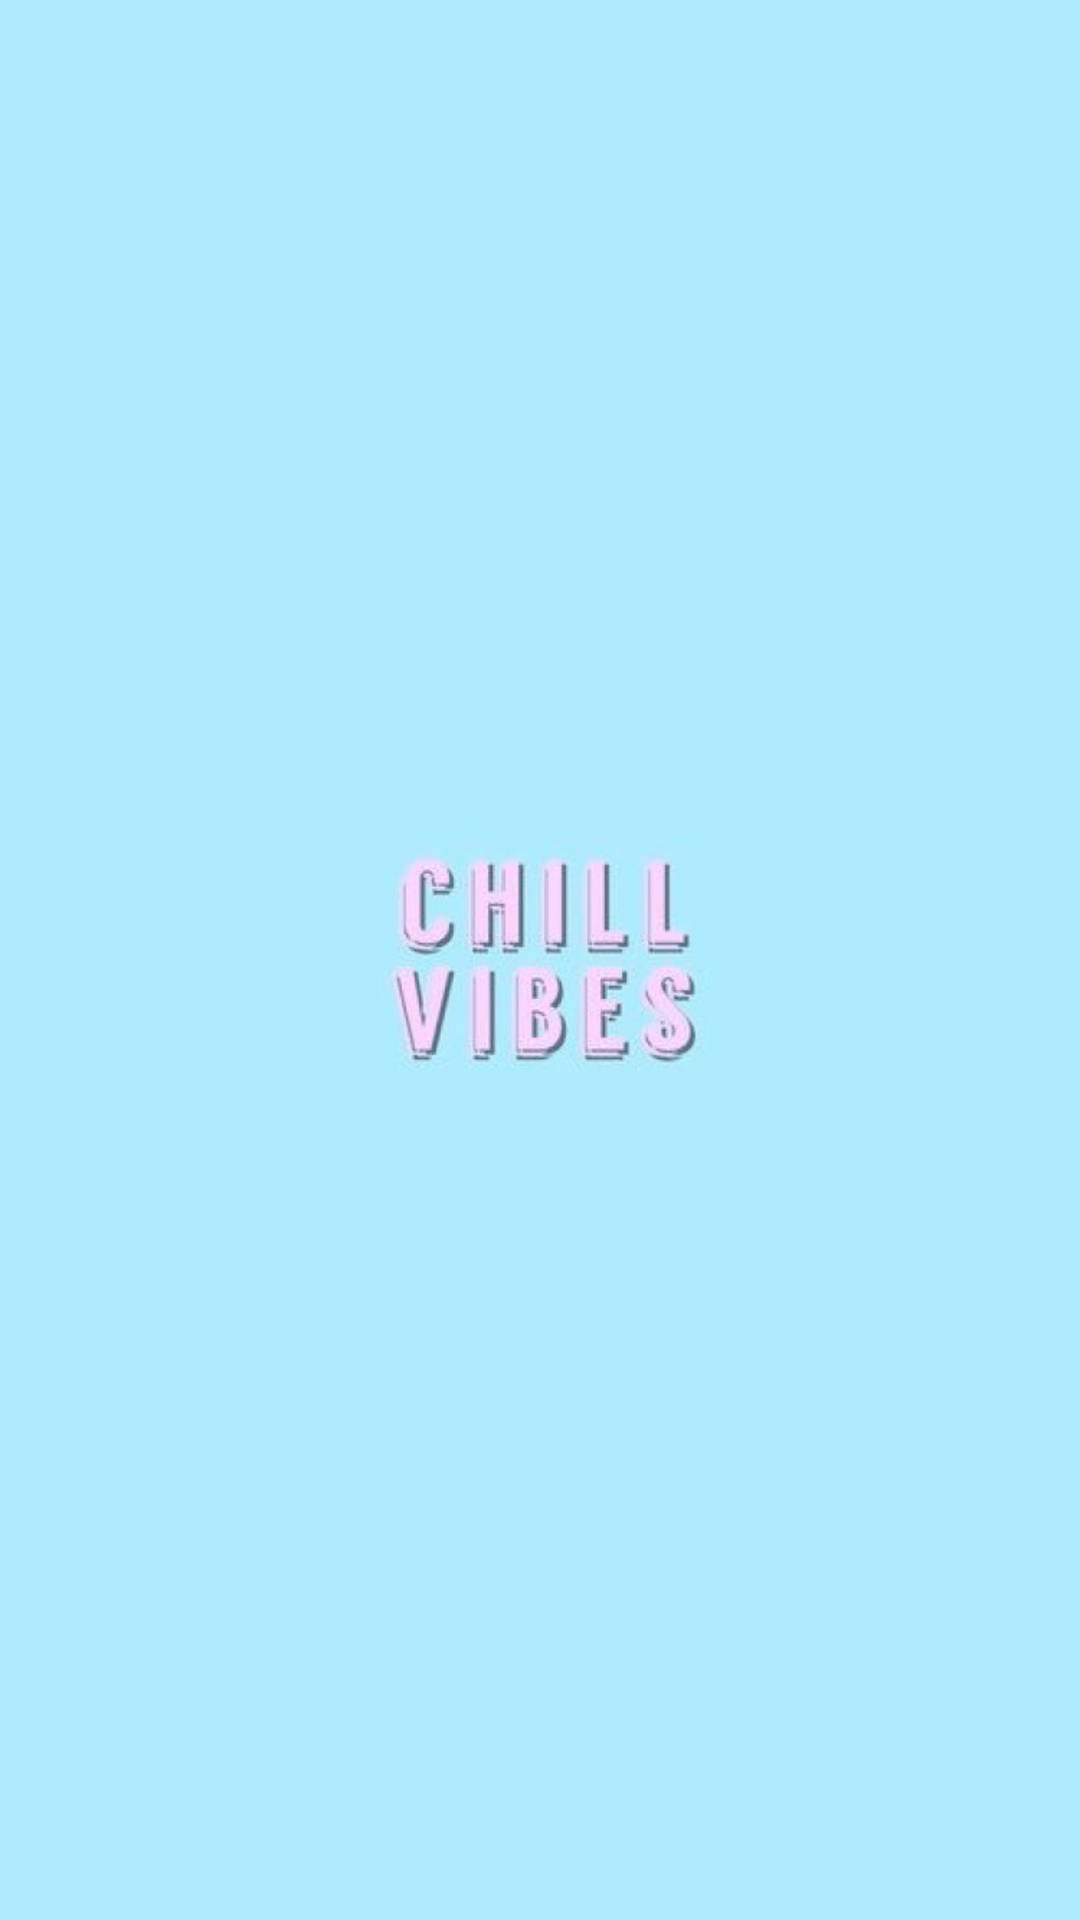 Embrace the cool vibes and enjoy life Wallpaper